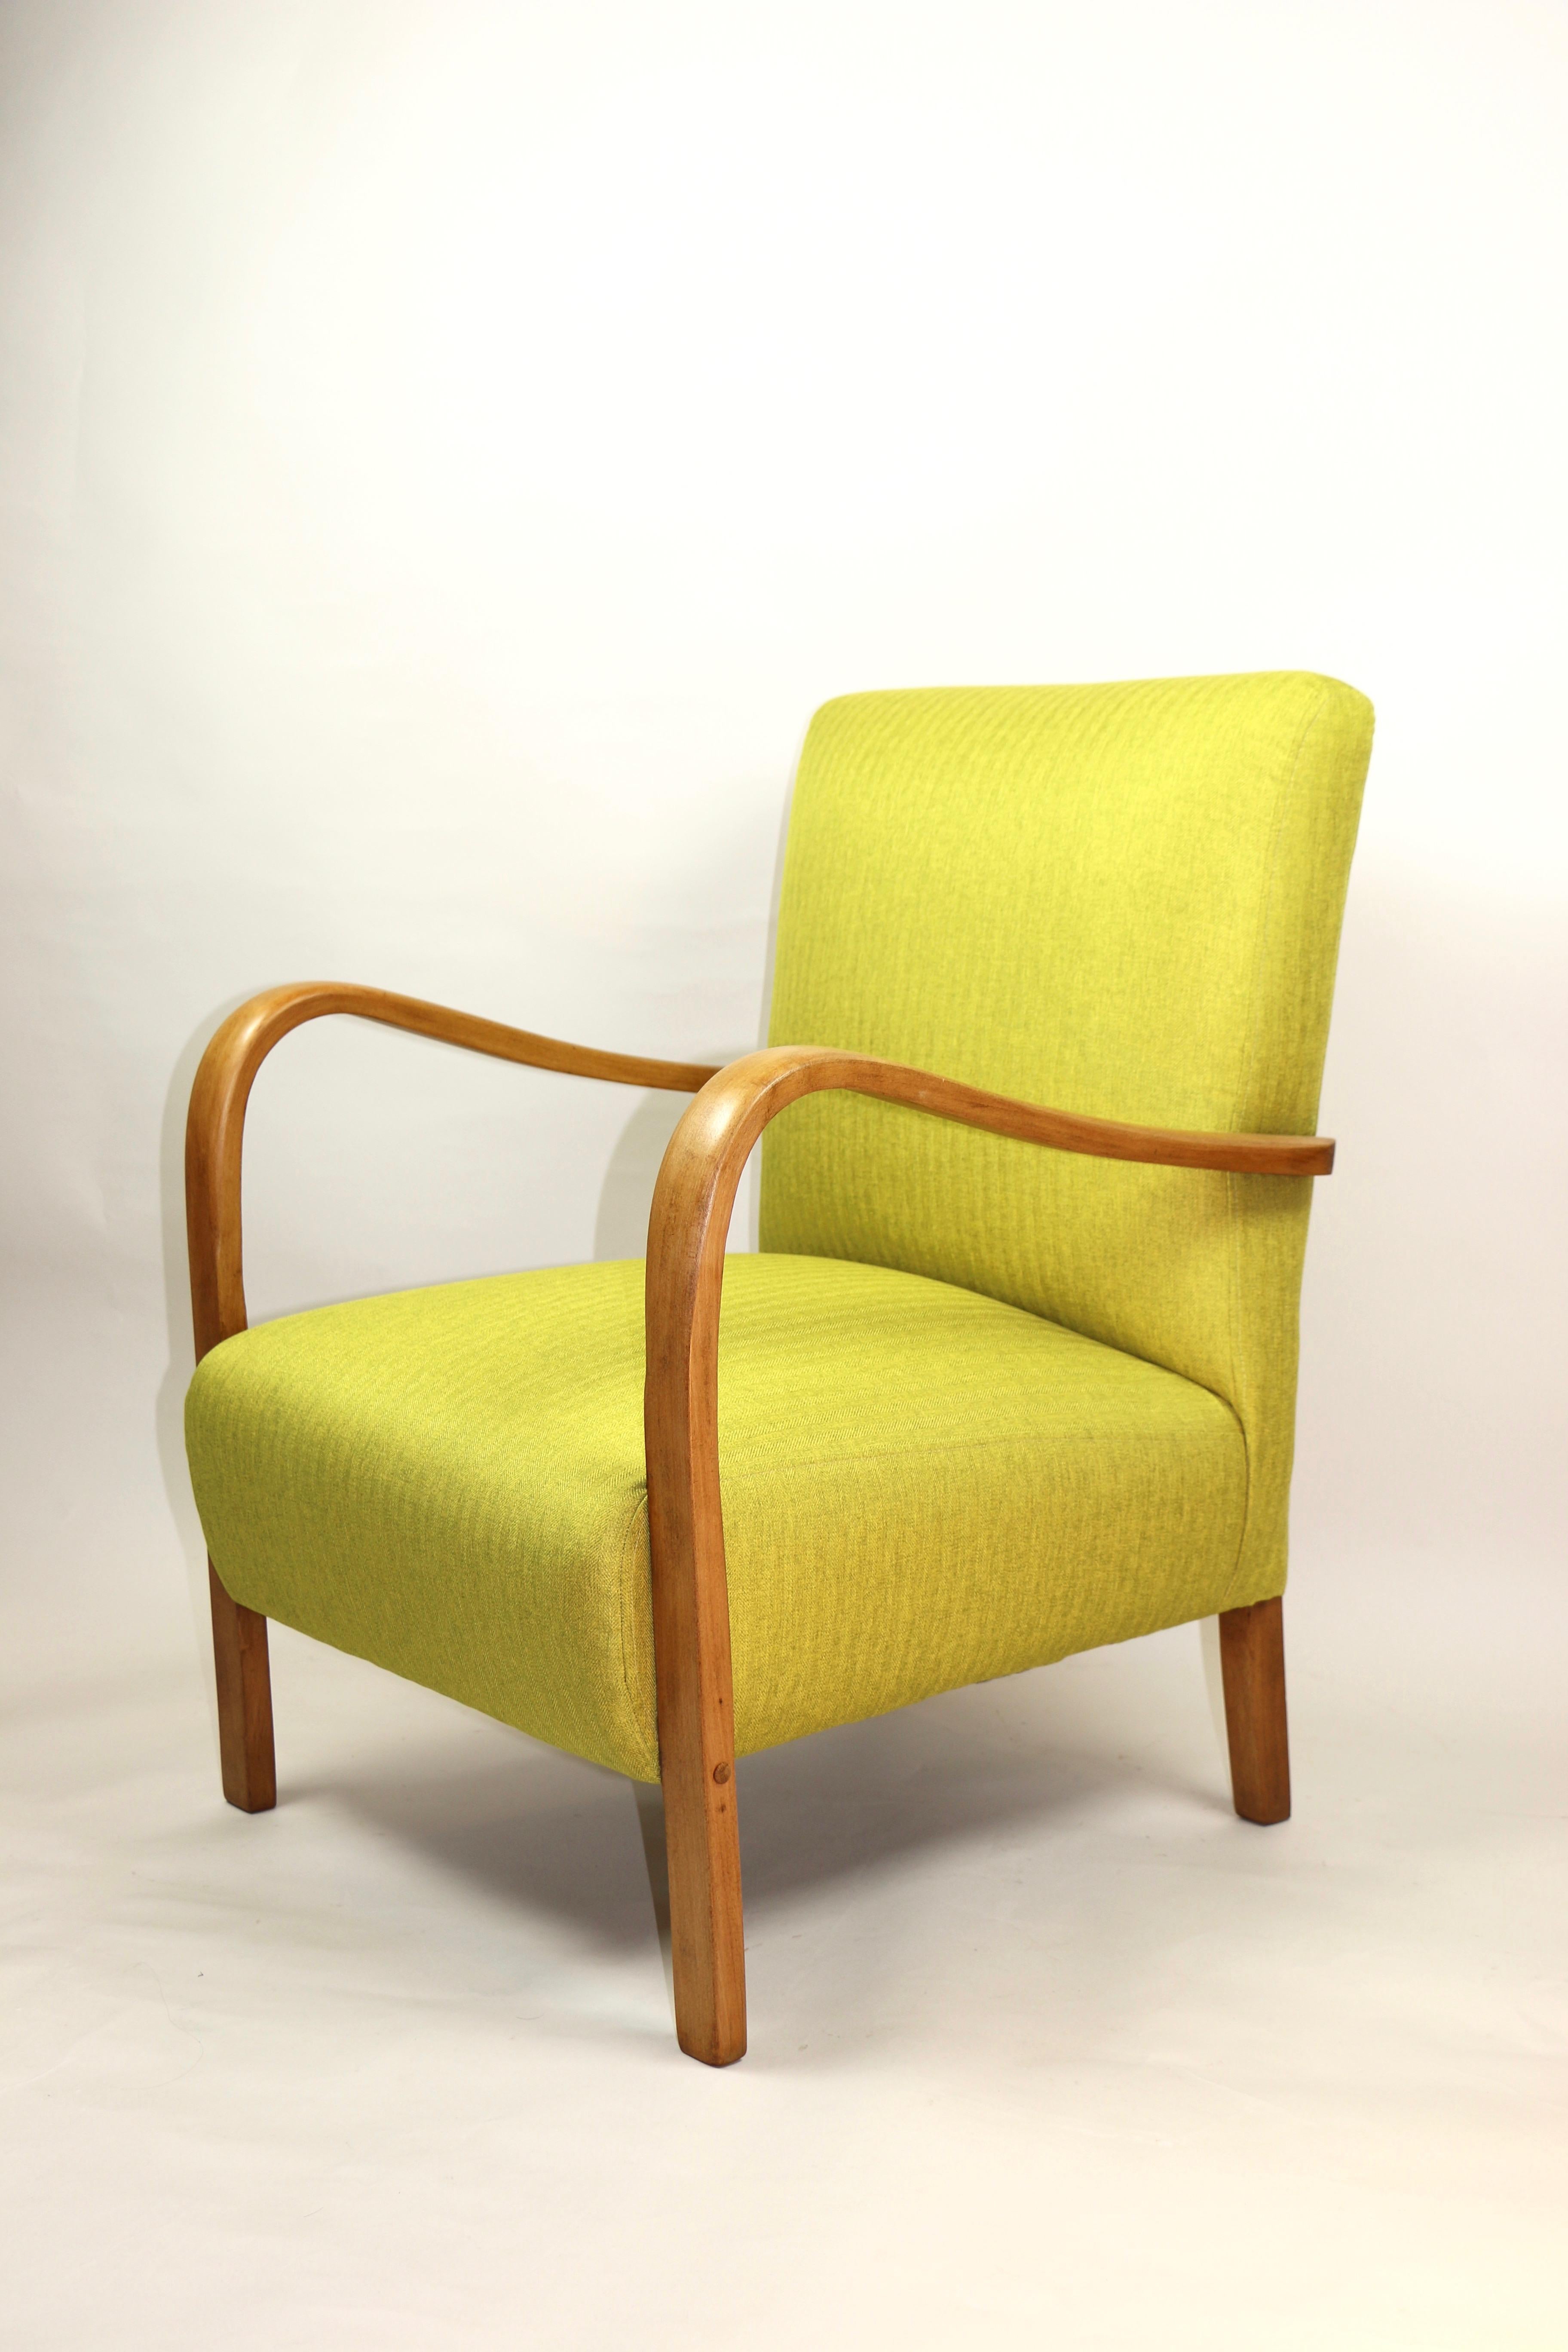 Woodwork Art Deco Armchair in Yellow from 20th Century For Sale